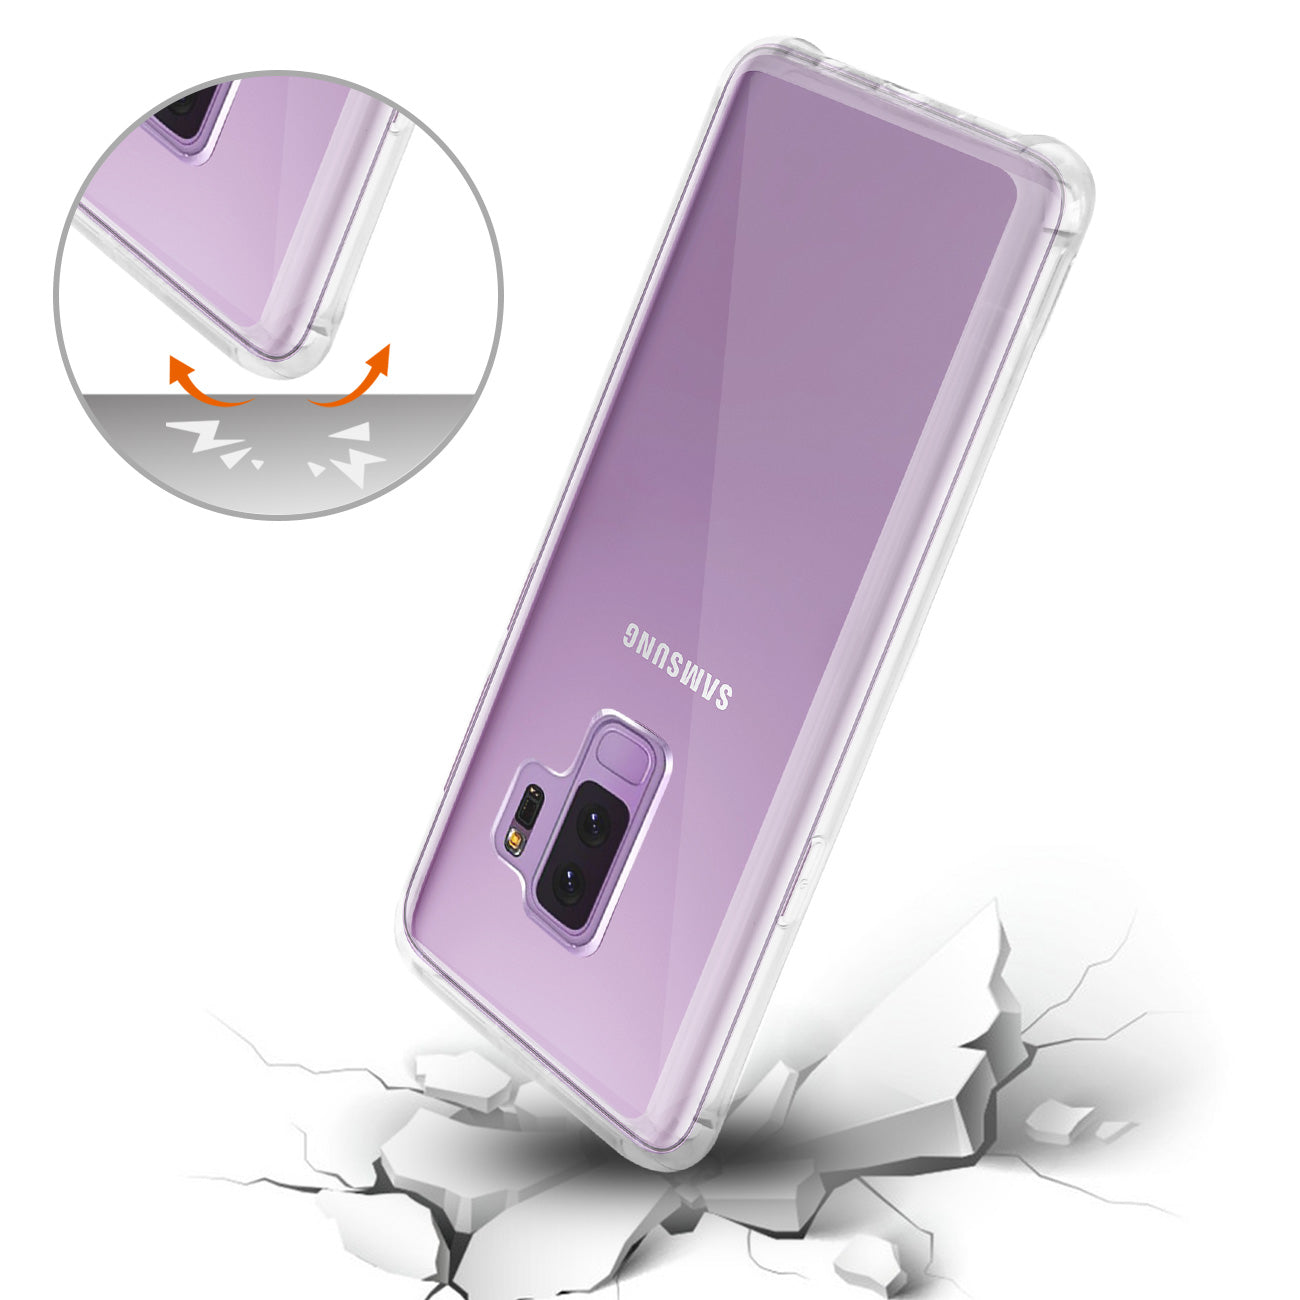 Samsung Galaxy S9 Plus Clear Bumper Case With Air Cushion Protection In Clear